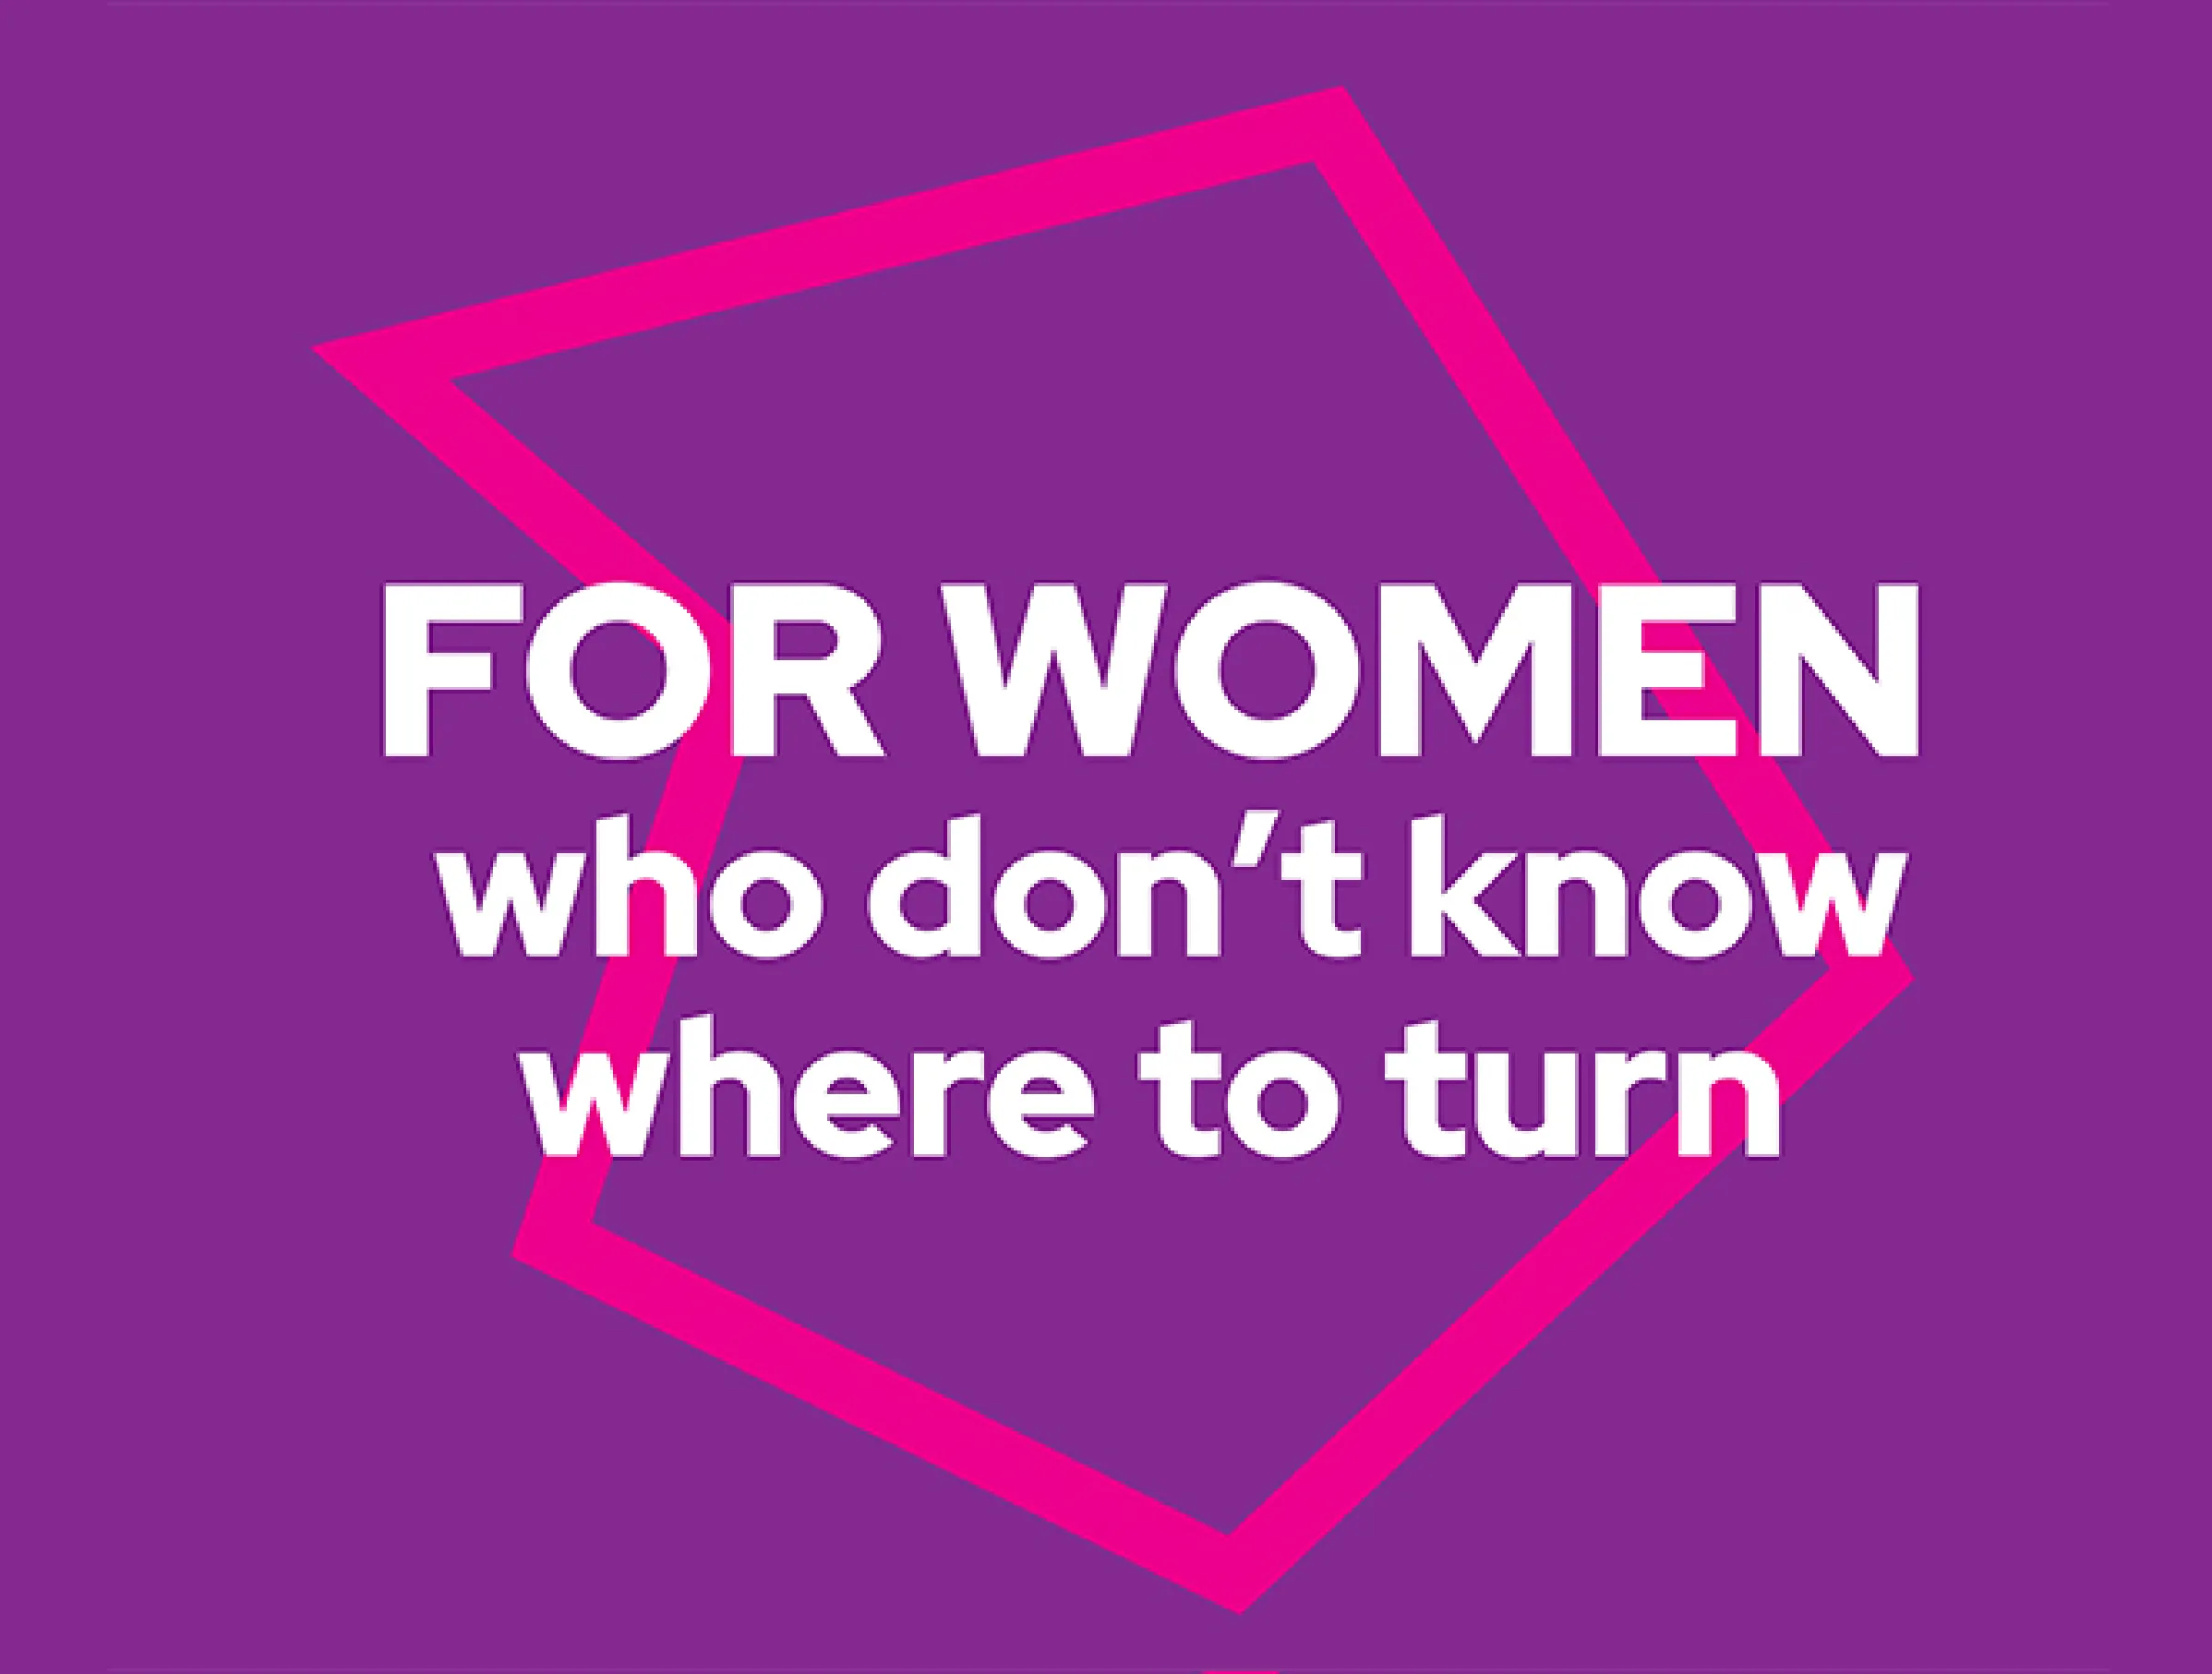 Anawim brand asset saying 'For women who don't know where to turn'